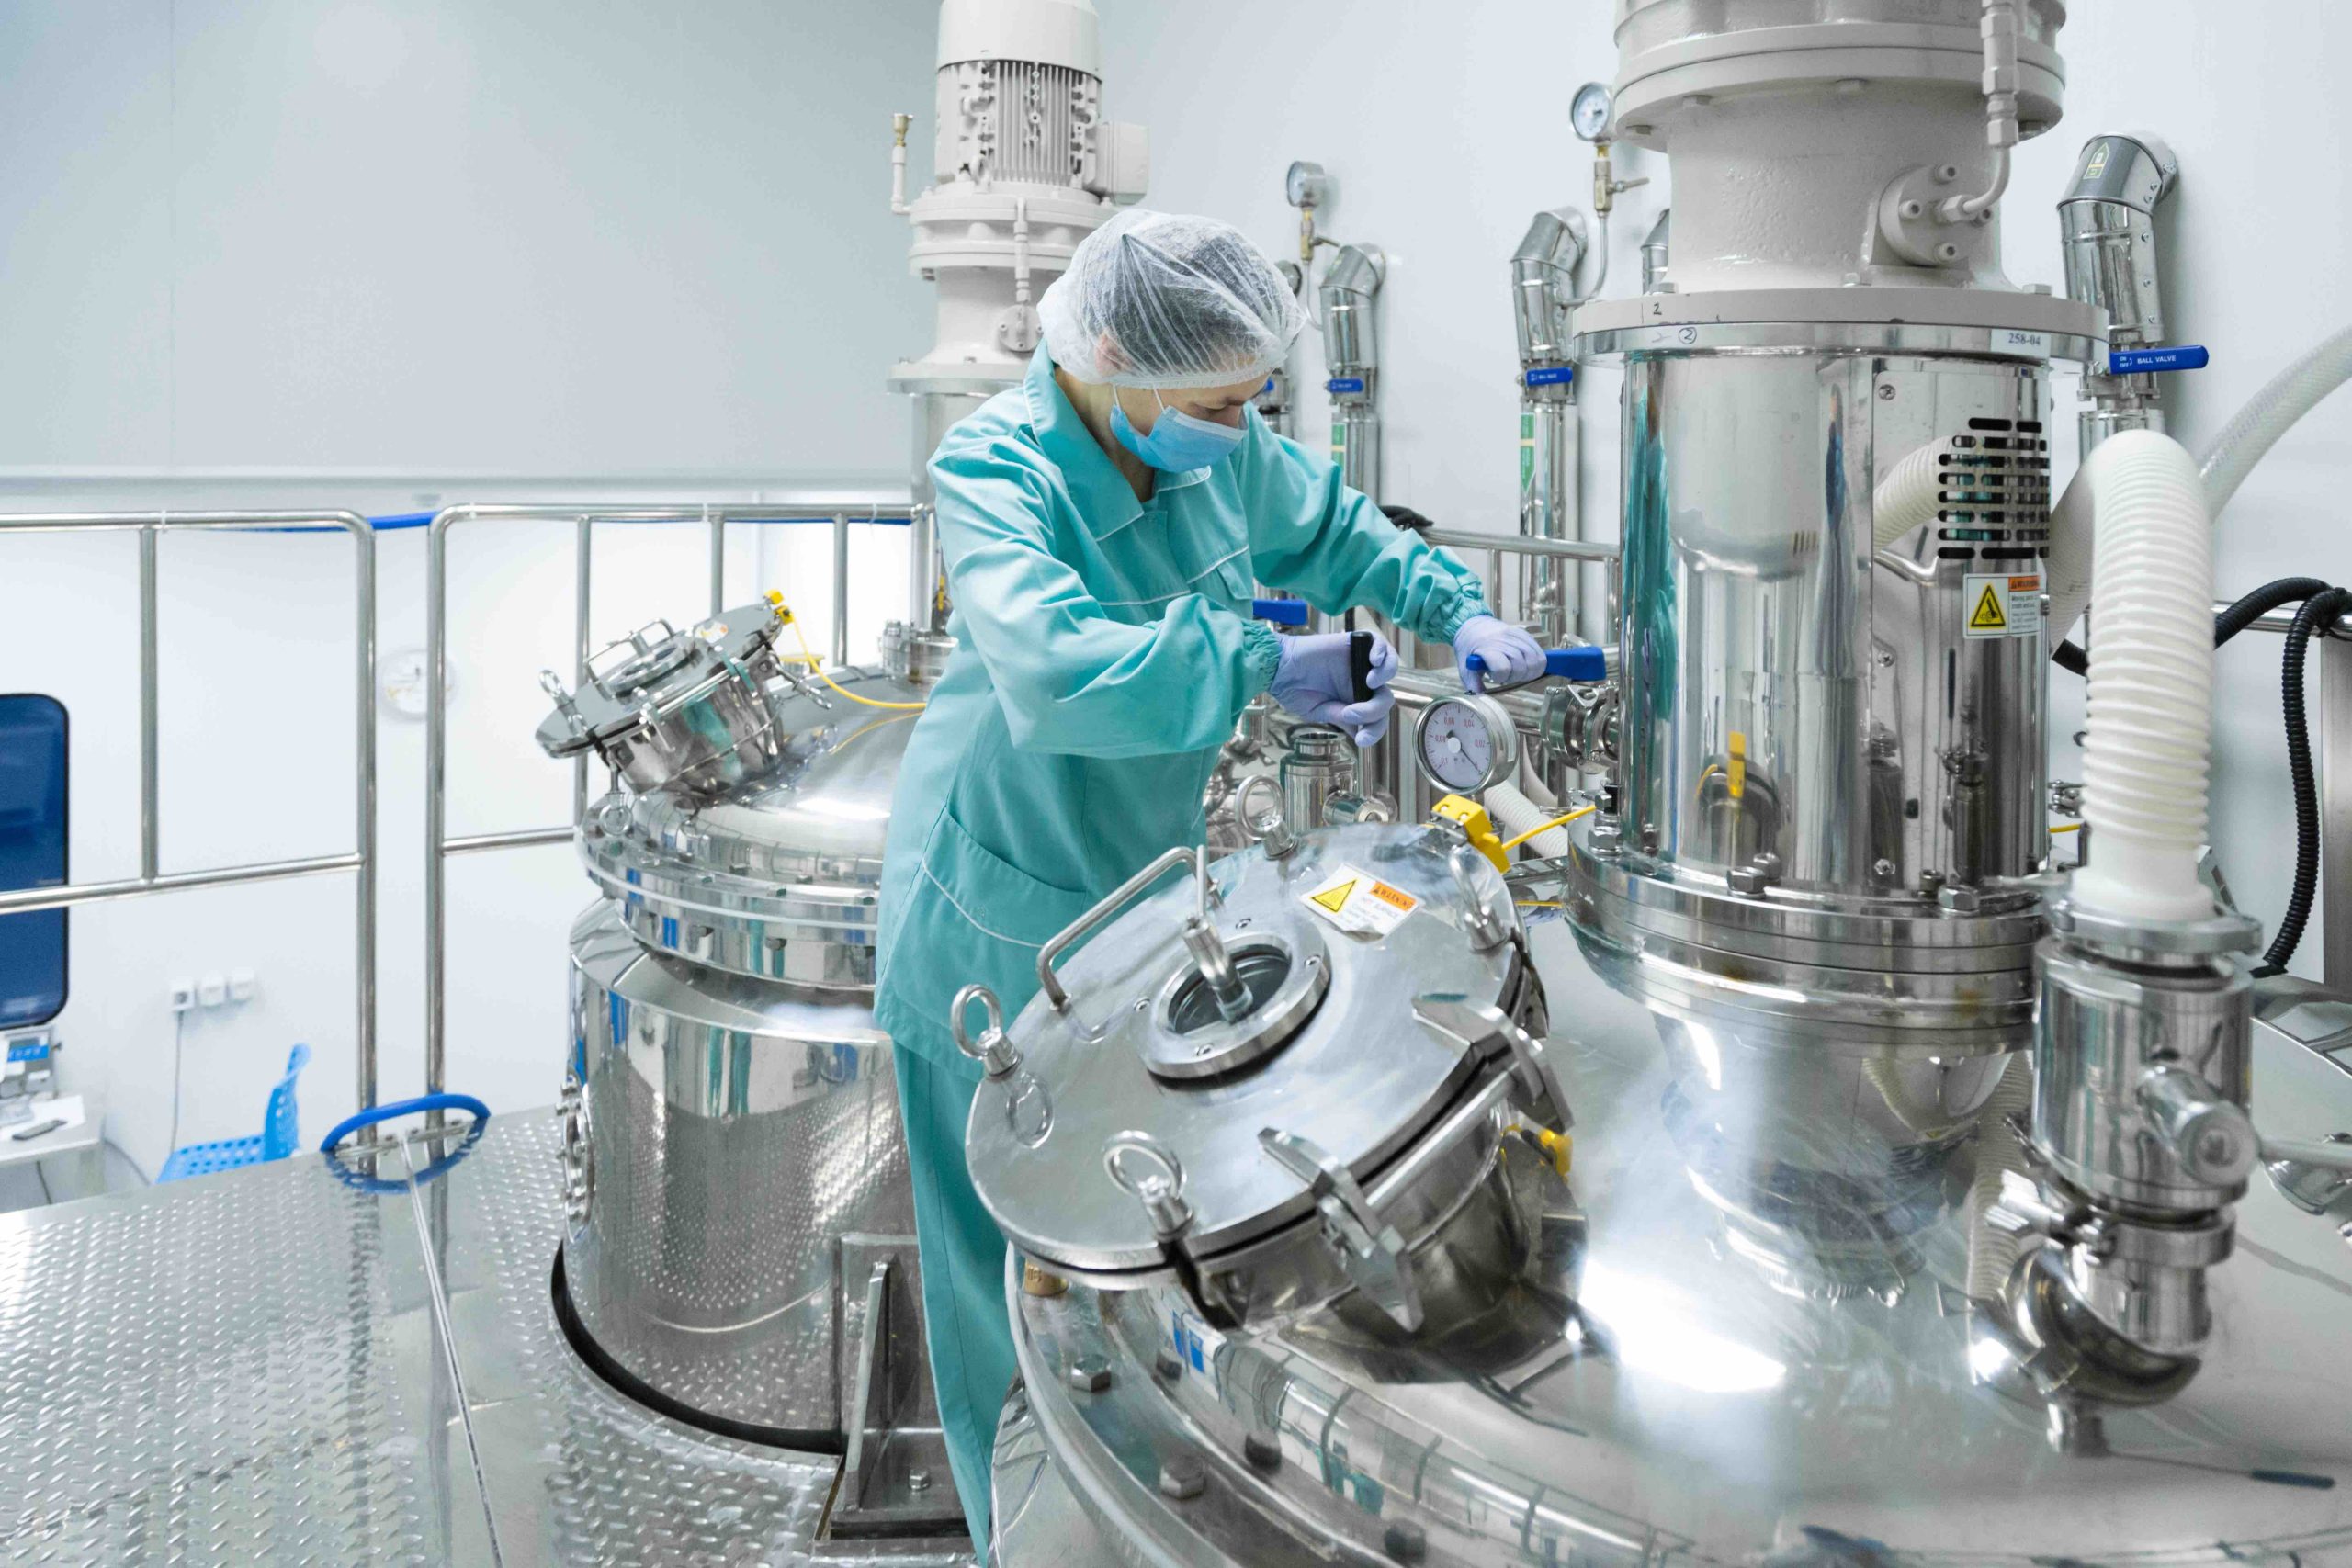 Sources of compression power in the pharmaceutical industry